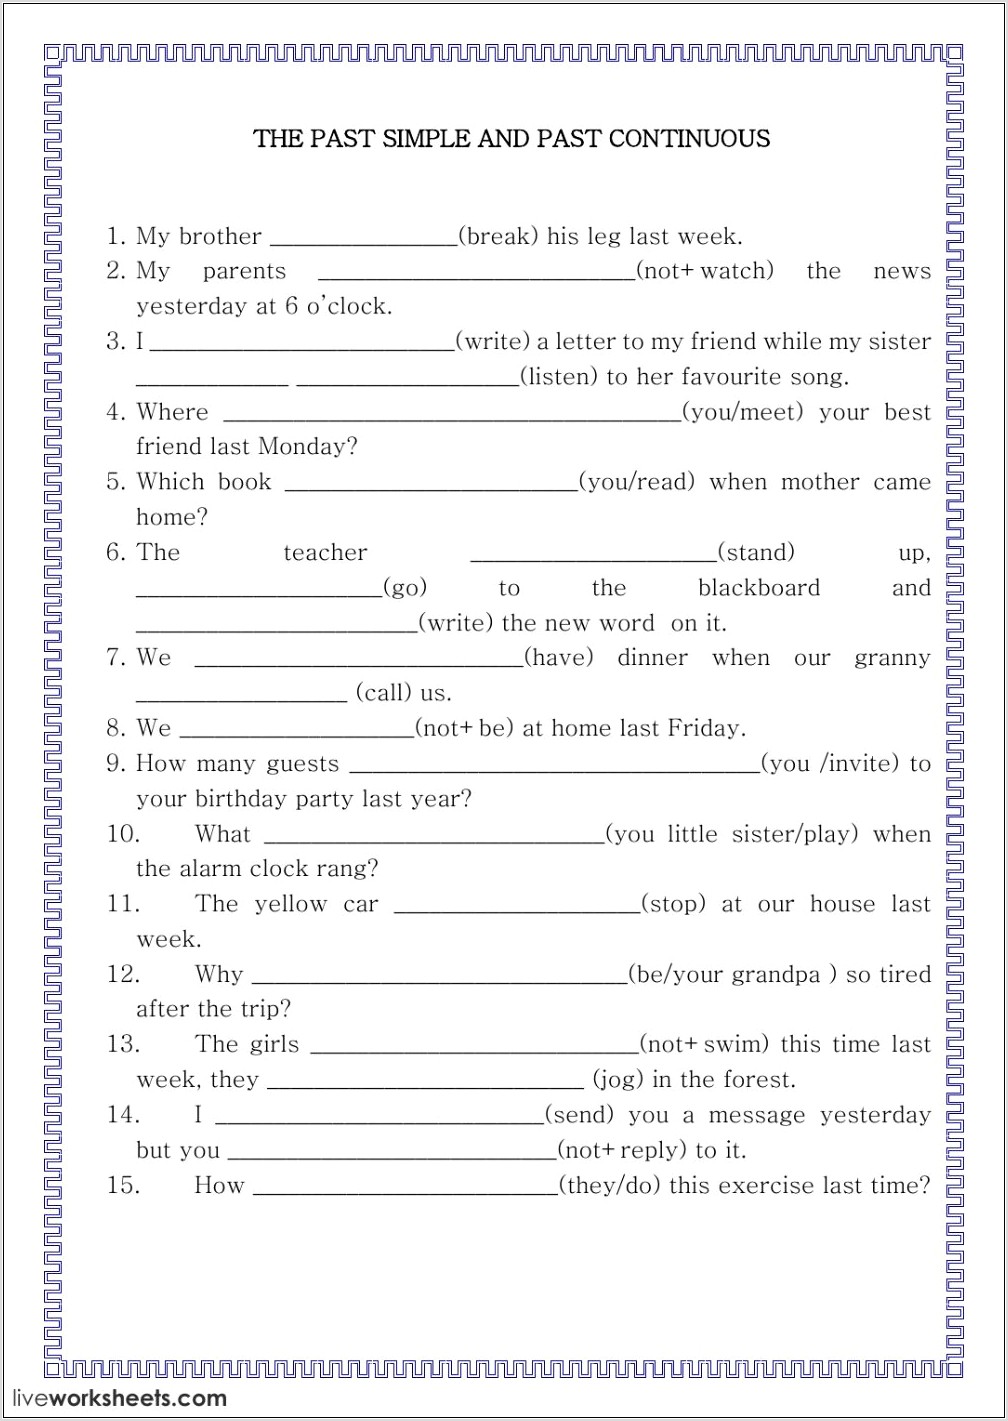 Worksheet Simple Past And Past Continuous